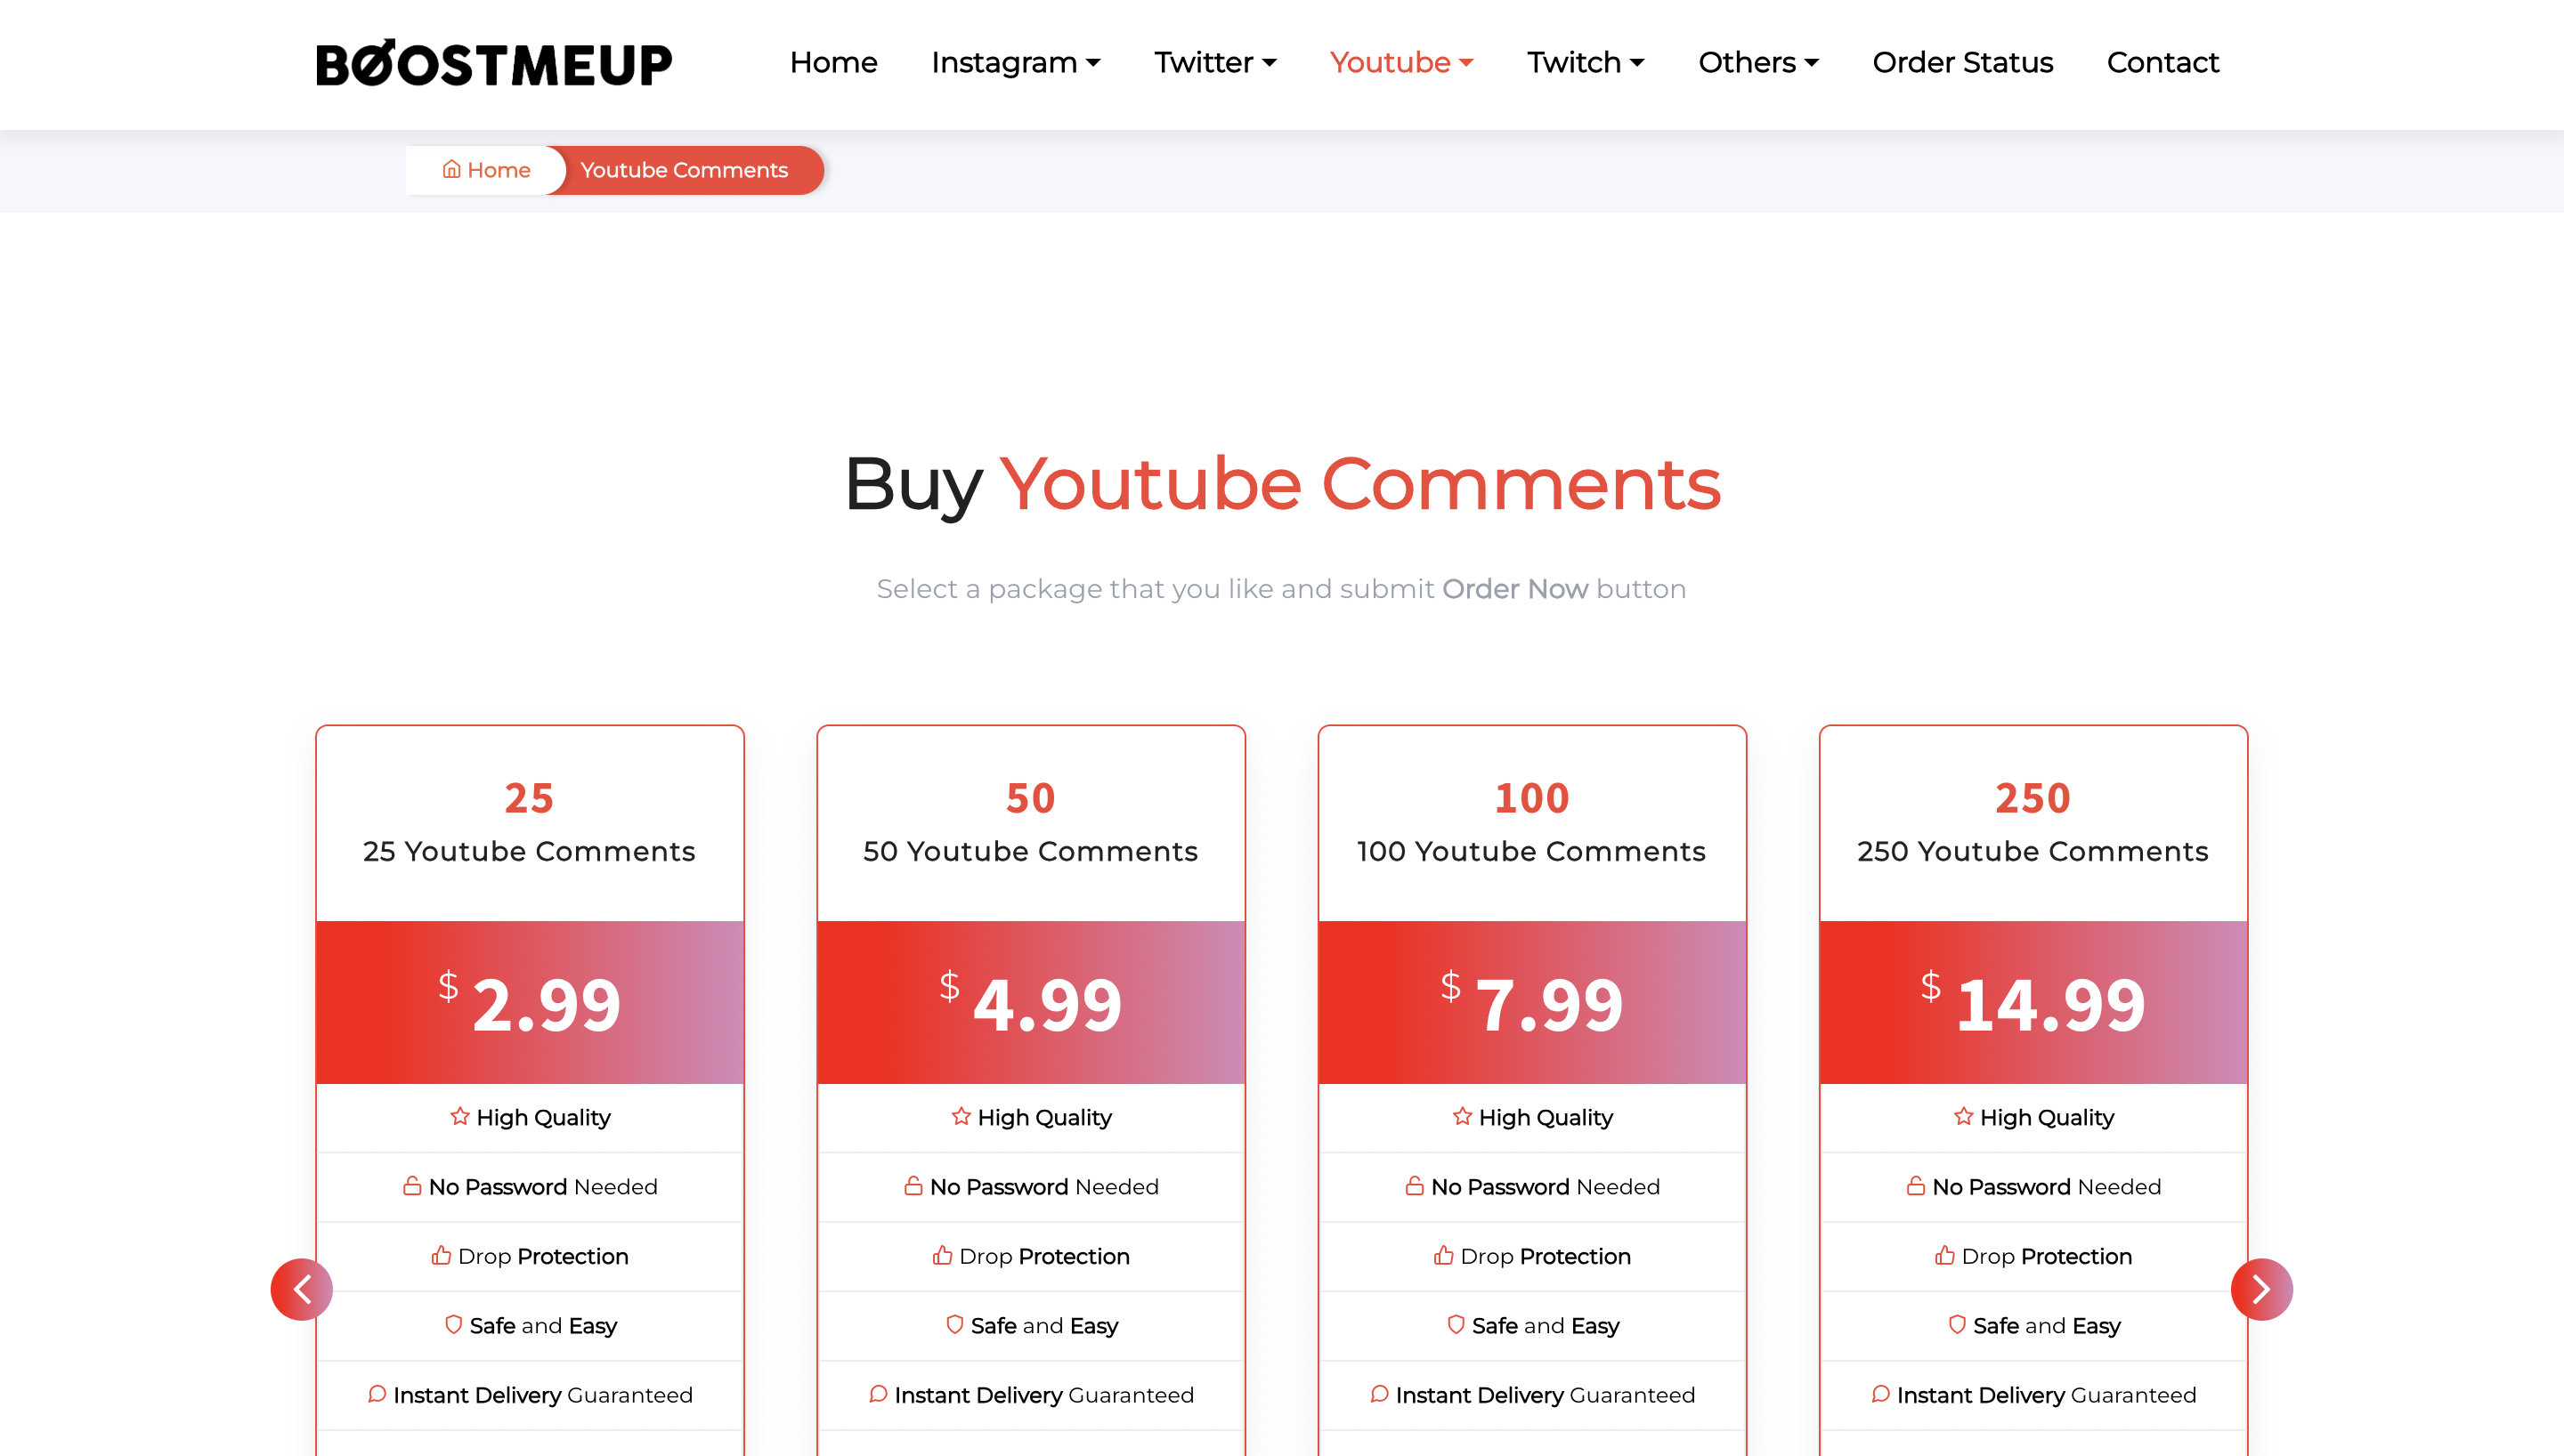 Buy custom YouTube comments on Boostmeup